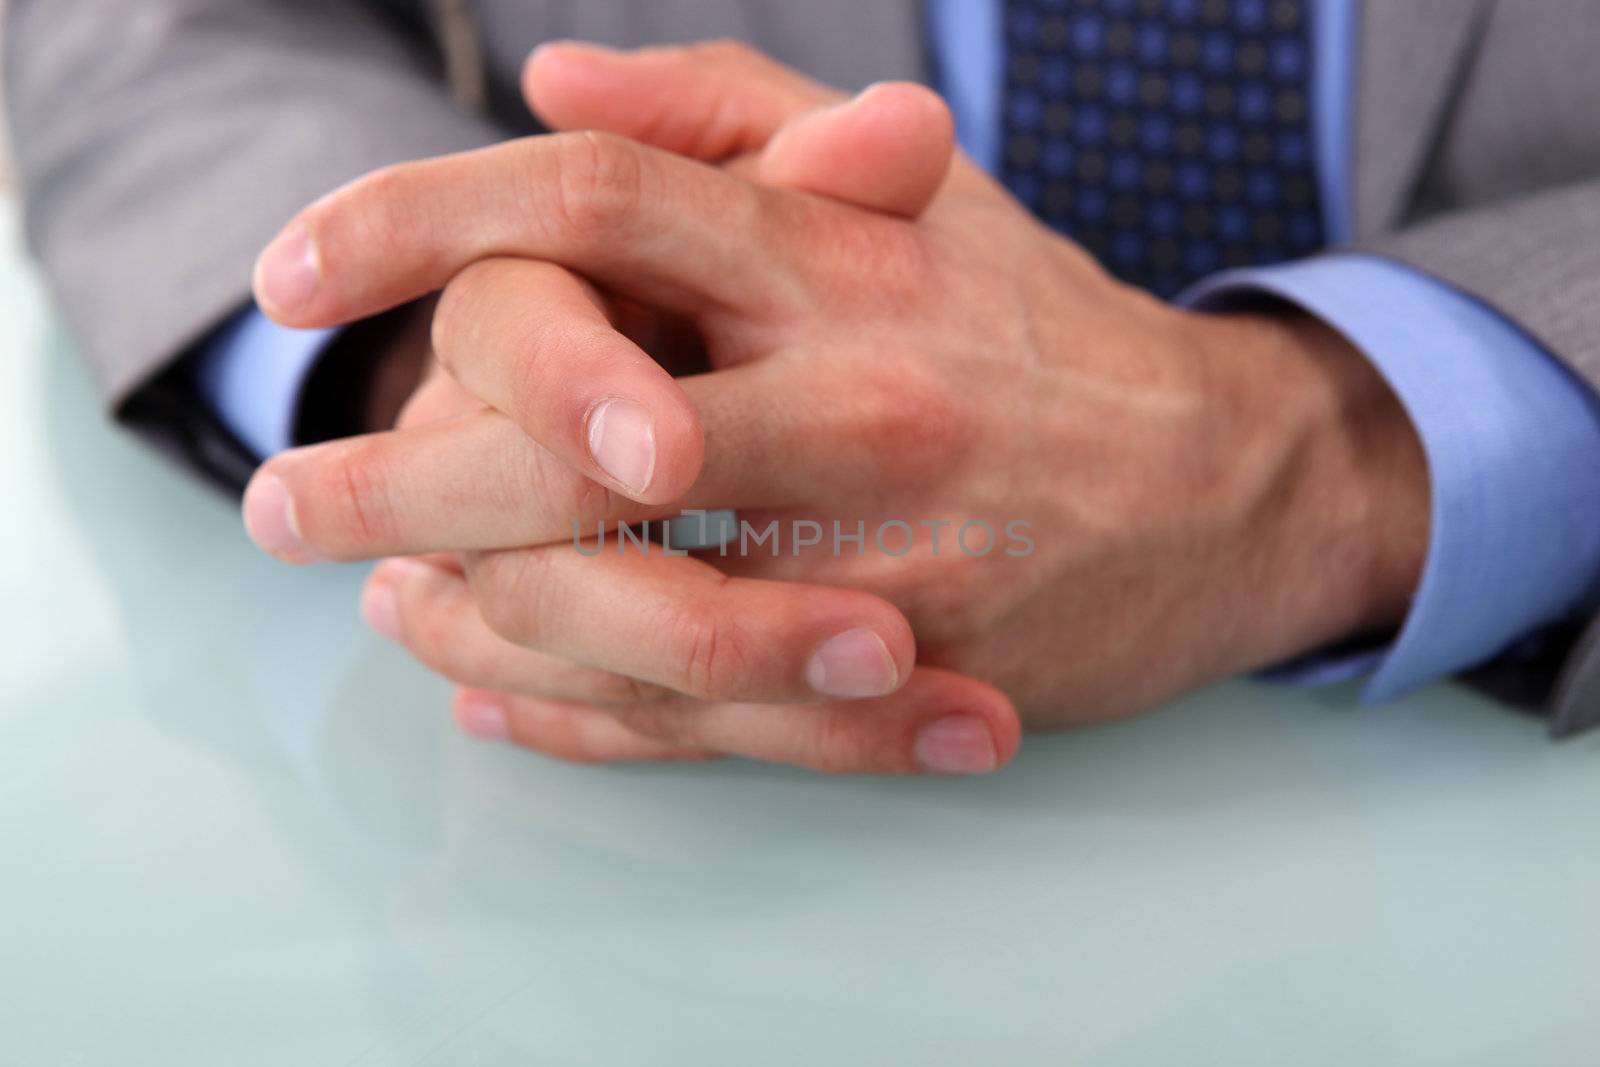 Human hands clasped